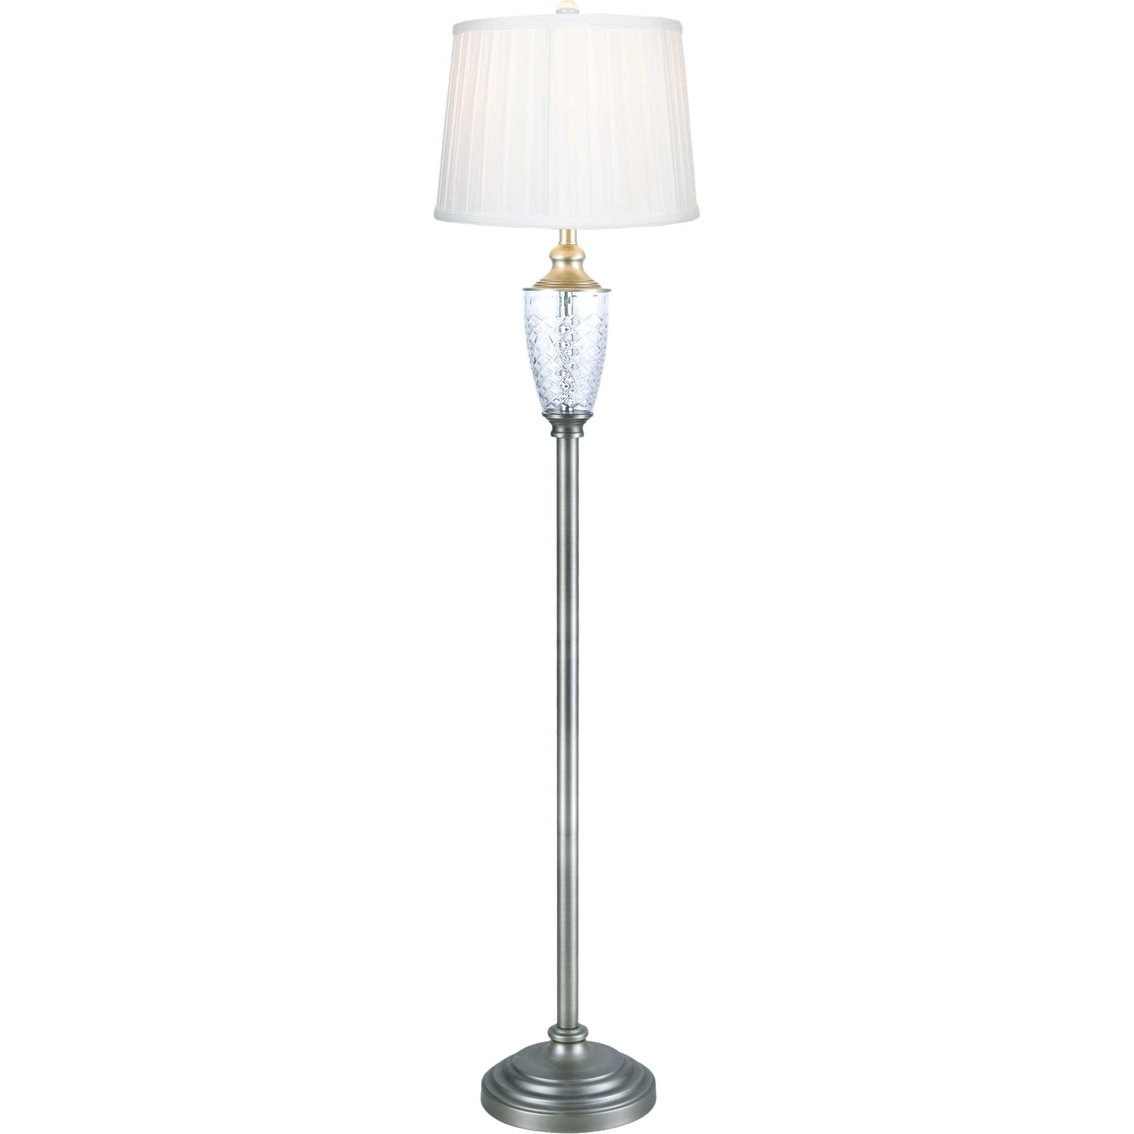 Dale Tiffany Castle 60 in. Mountains 24% Lead Crystal Floor Lamp